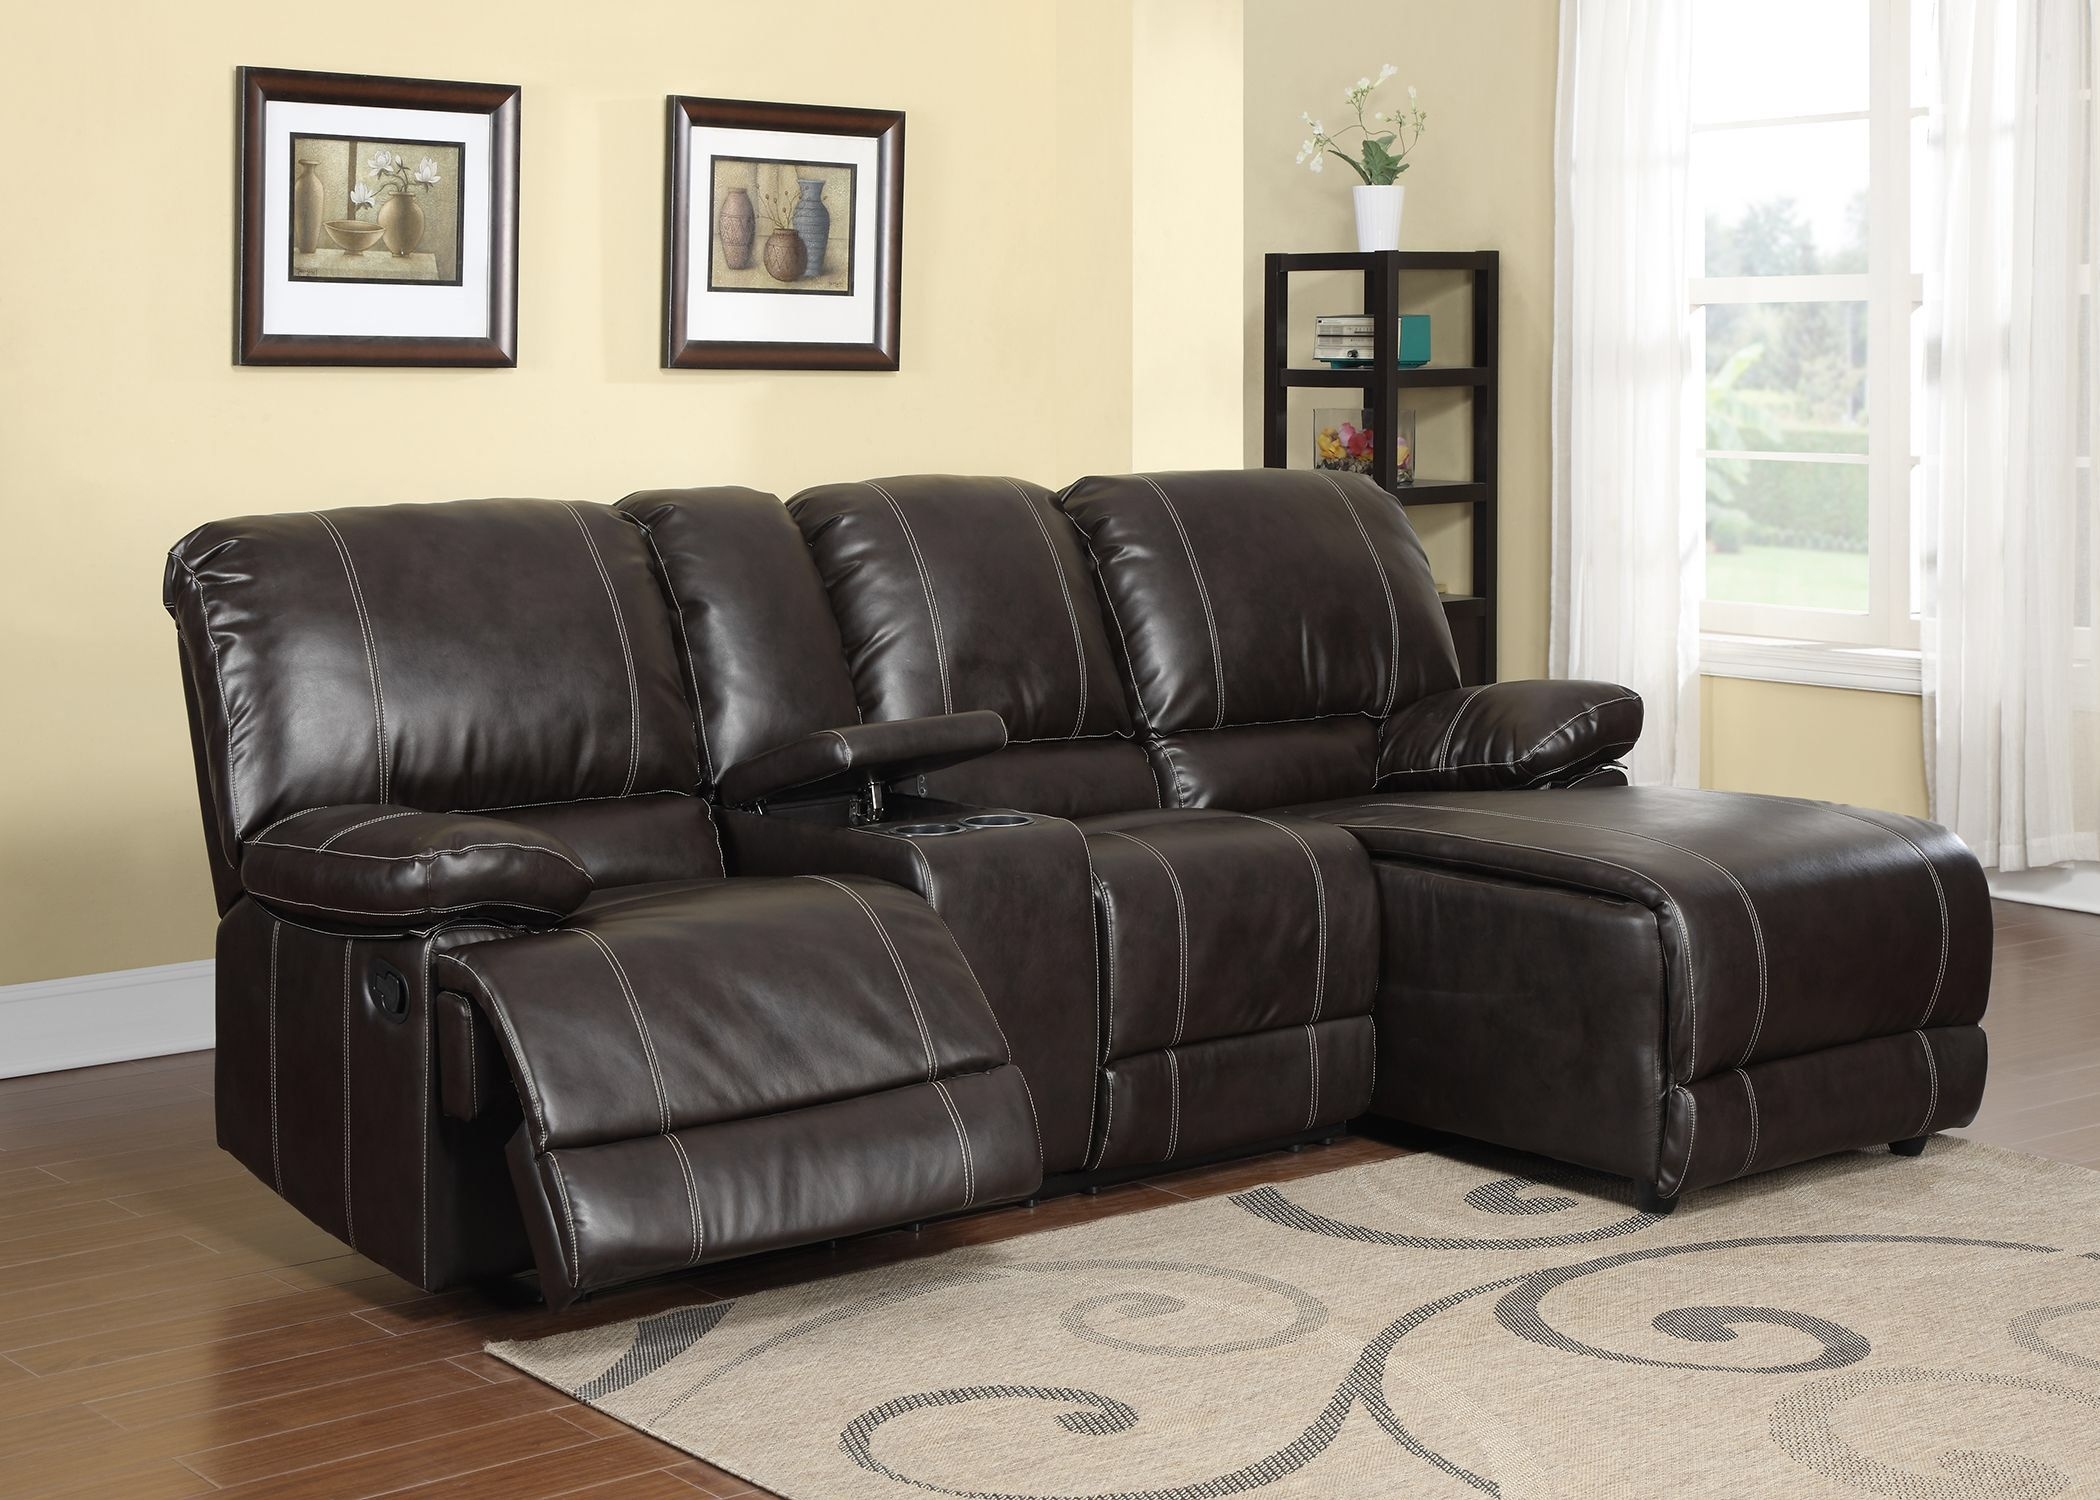 Small Sectional Sofa With Recliner, Reclining Leather Couch